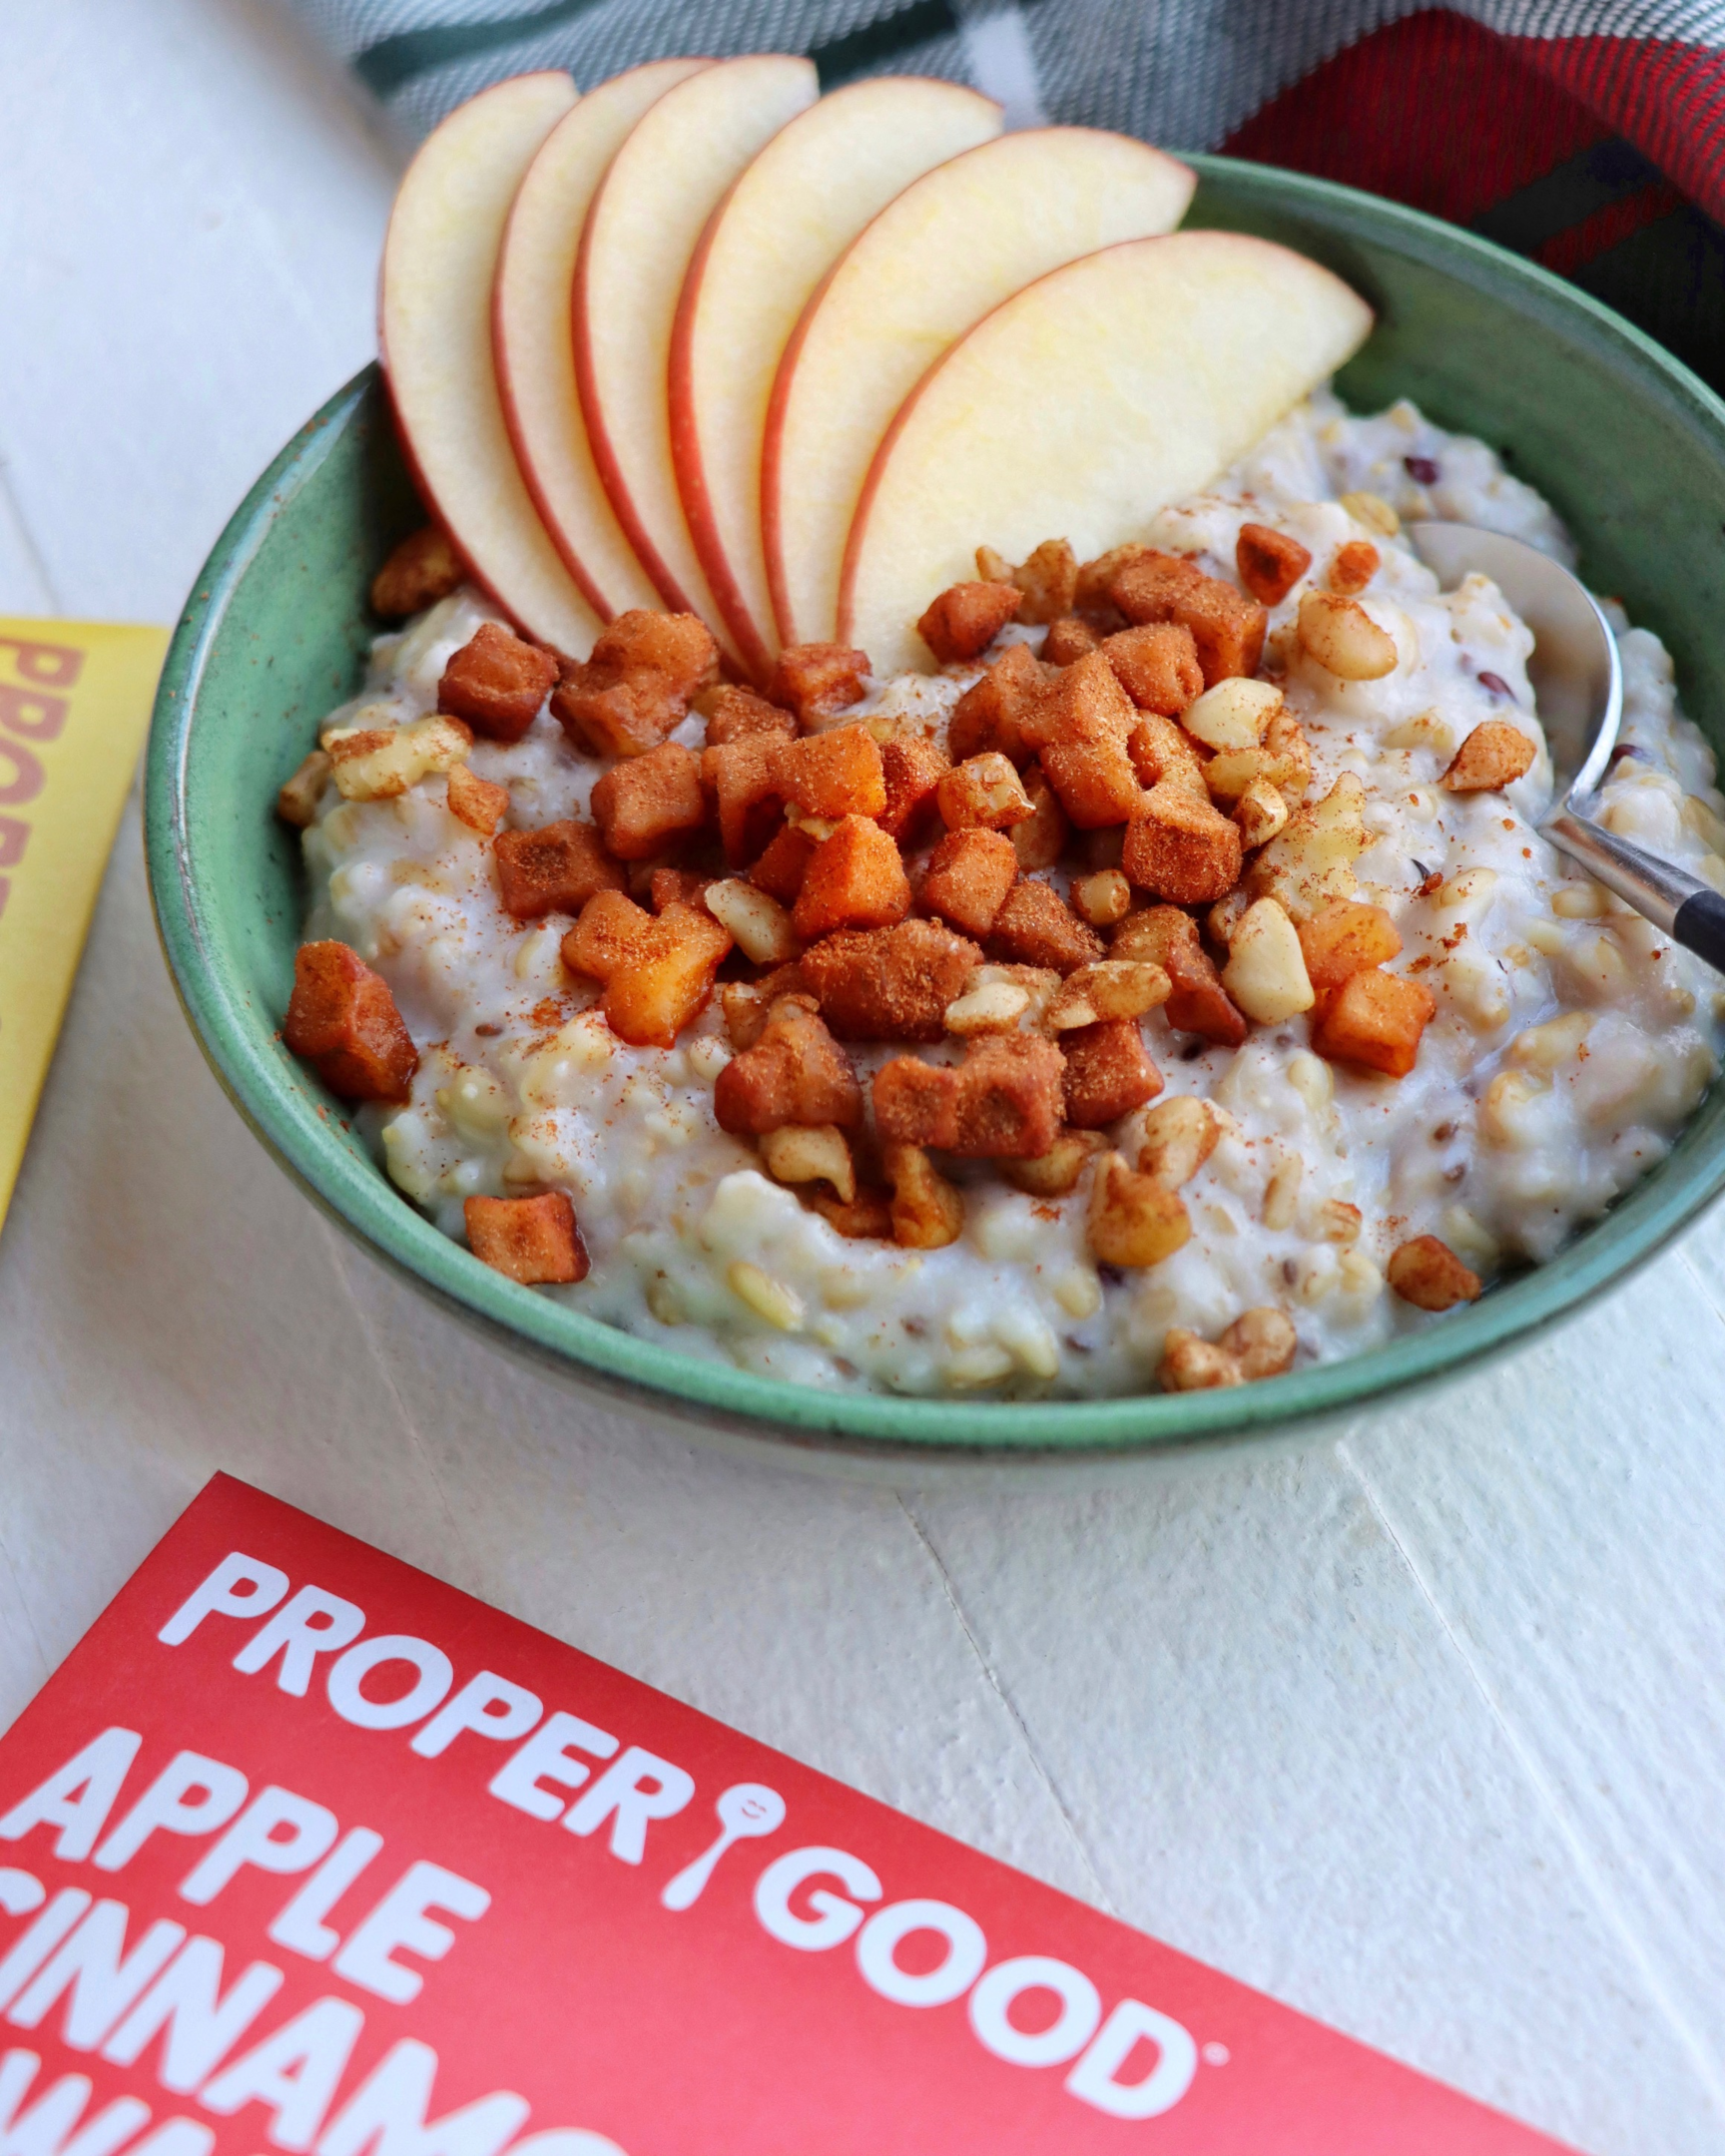 Delicious bowl of Proper Good's Apple Cinnamon & Walnut Oatmeal topped with fresh sliced apples